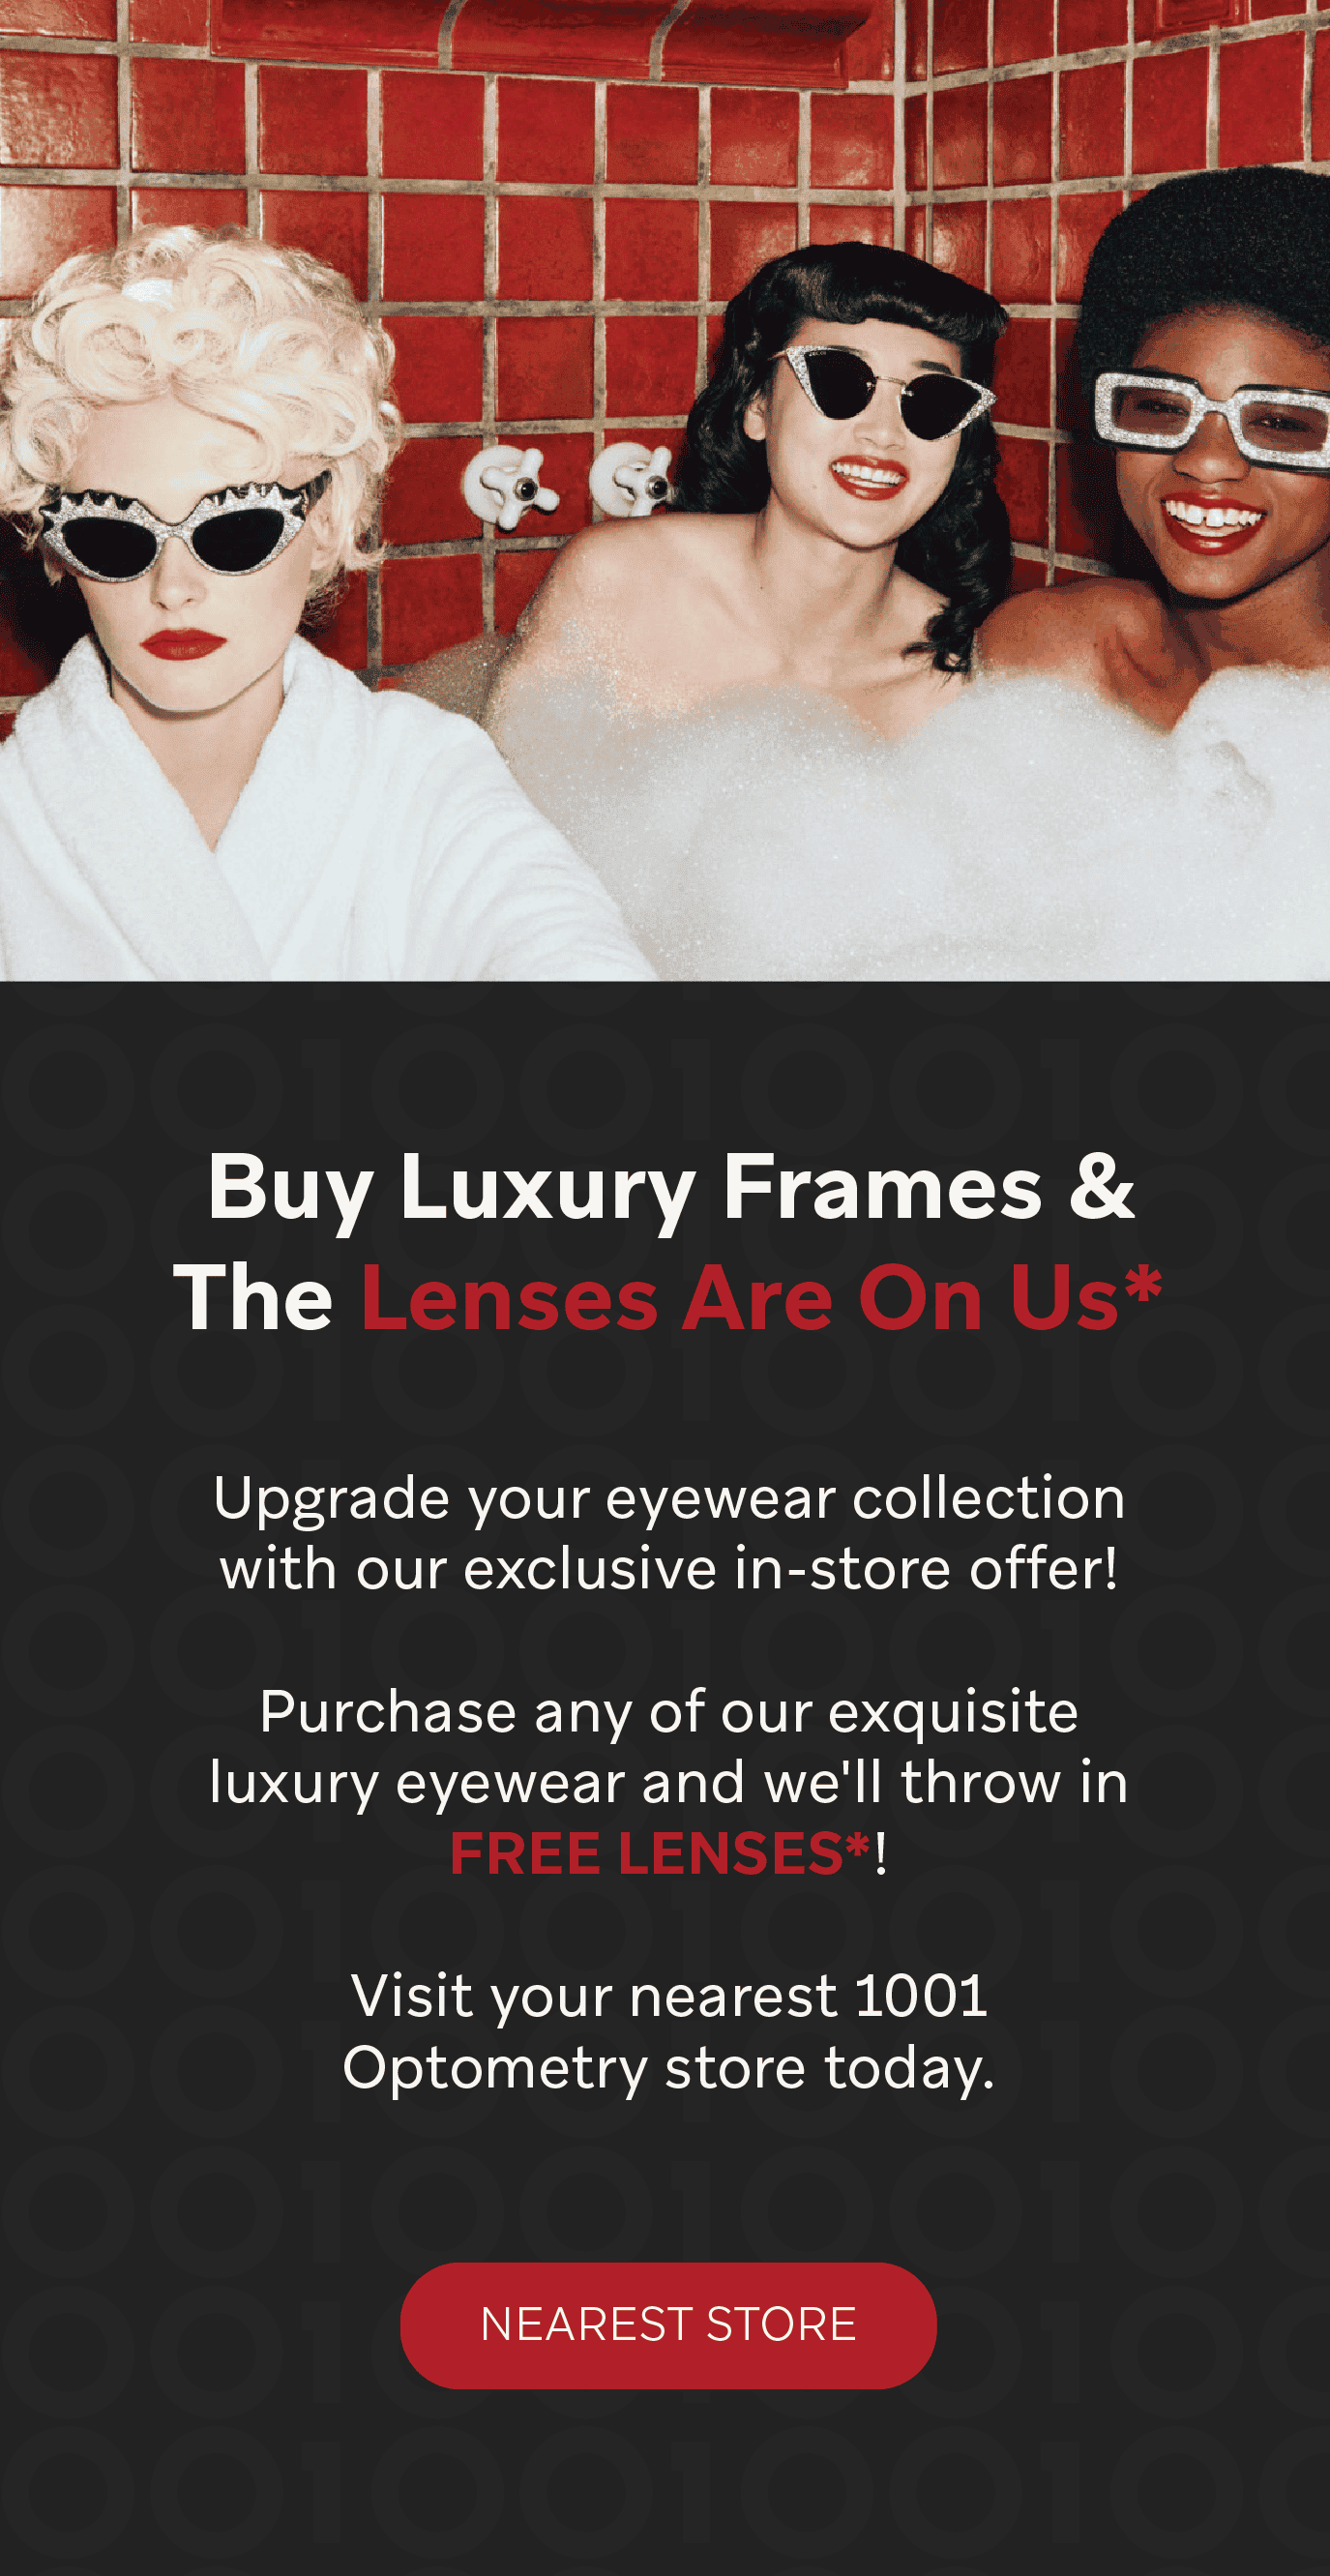 Buy Luxury Frames and Get Free Lenses at 1001 Optometry